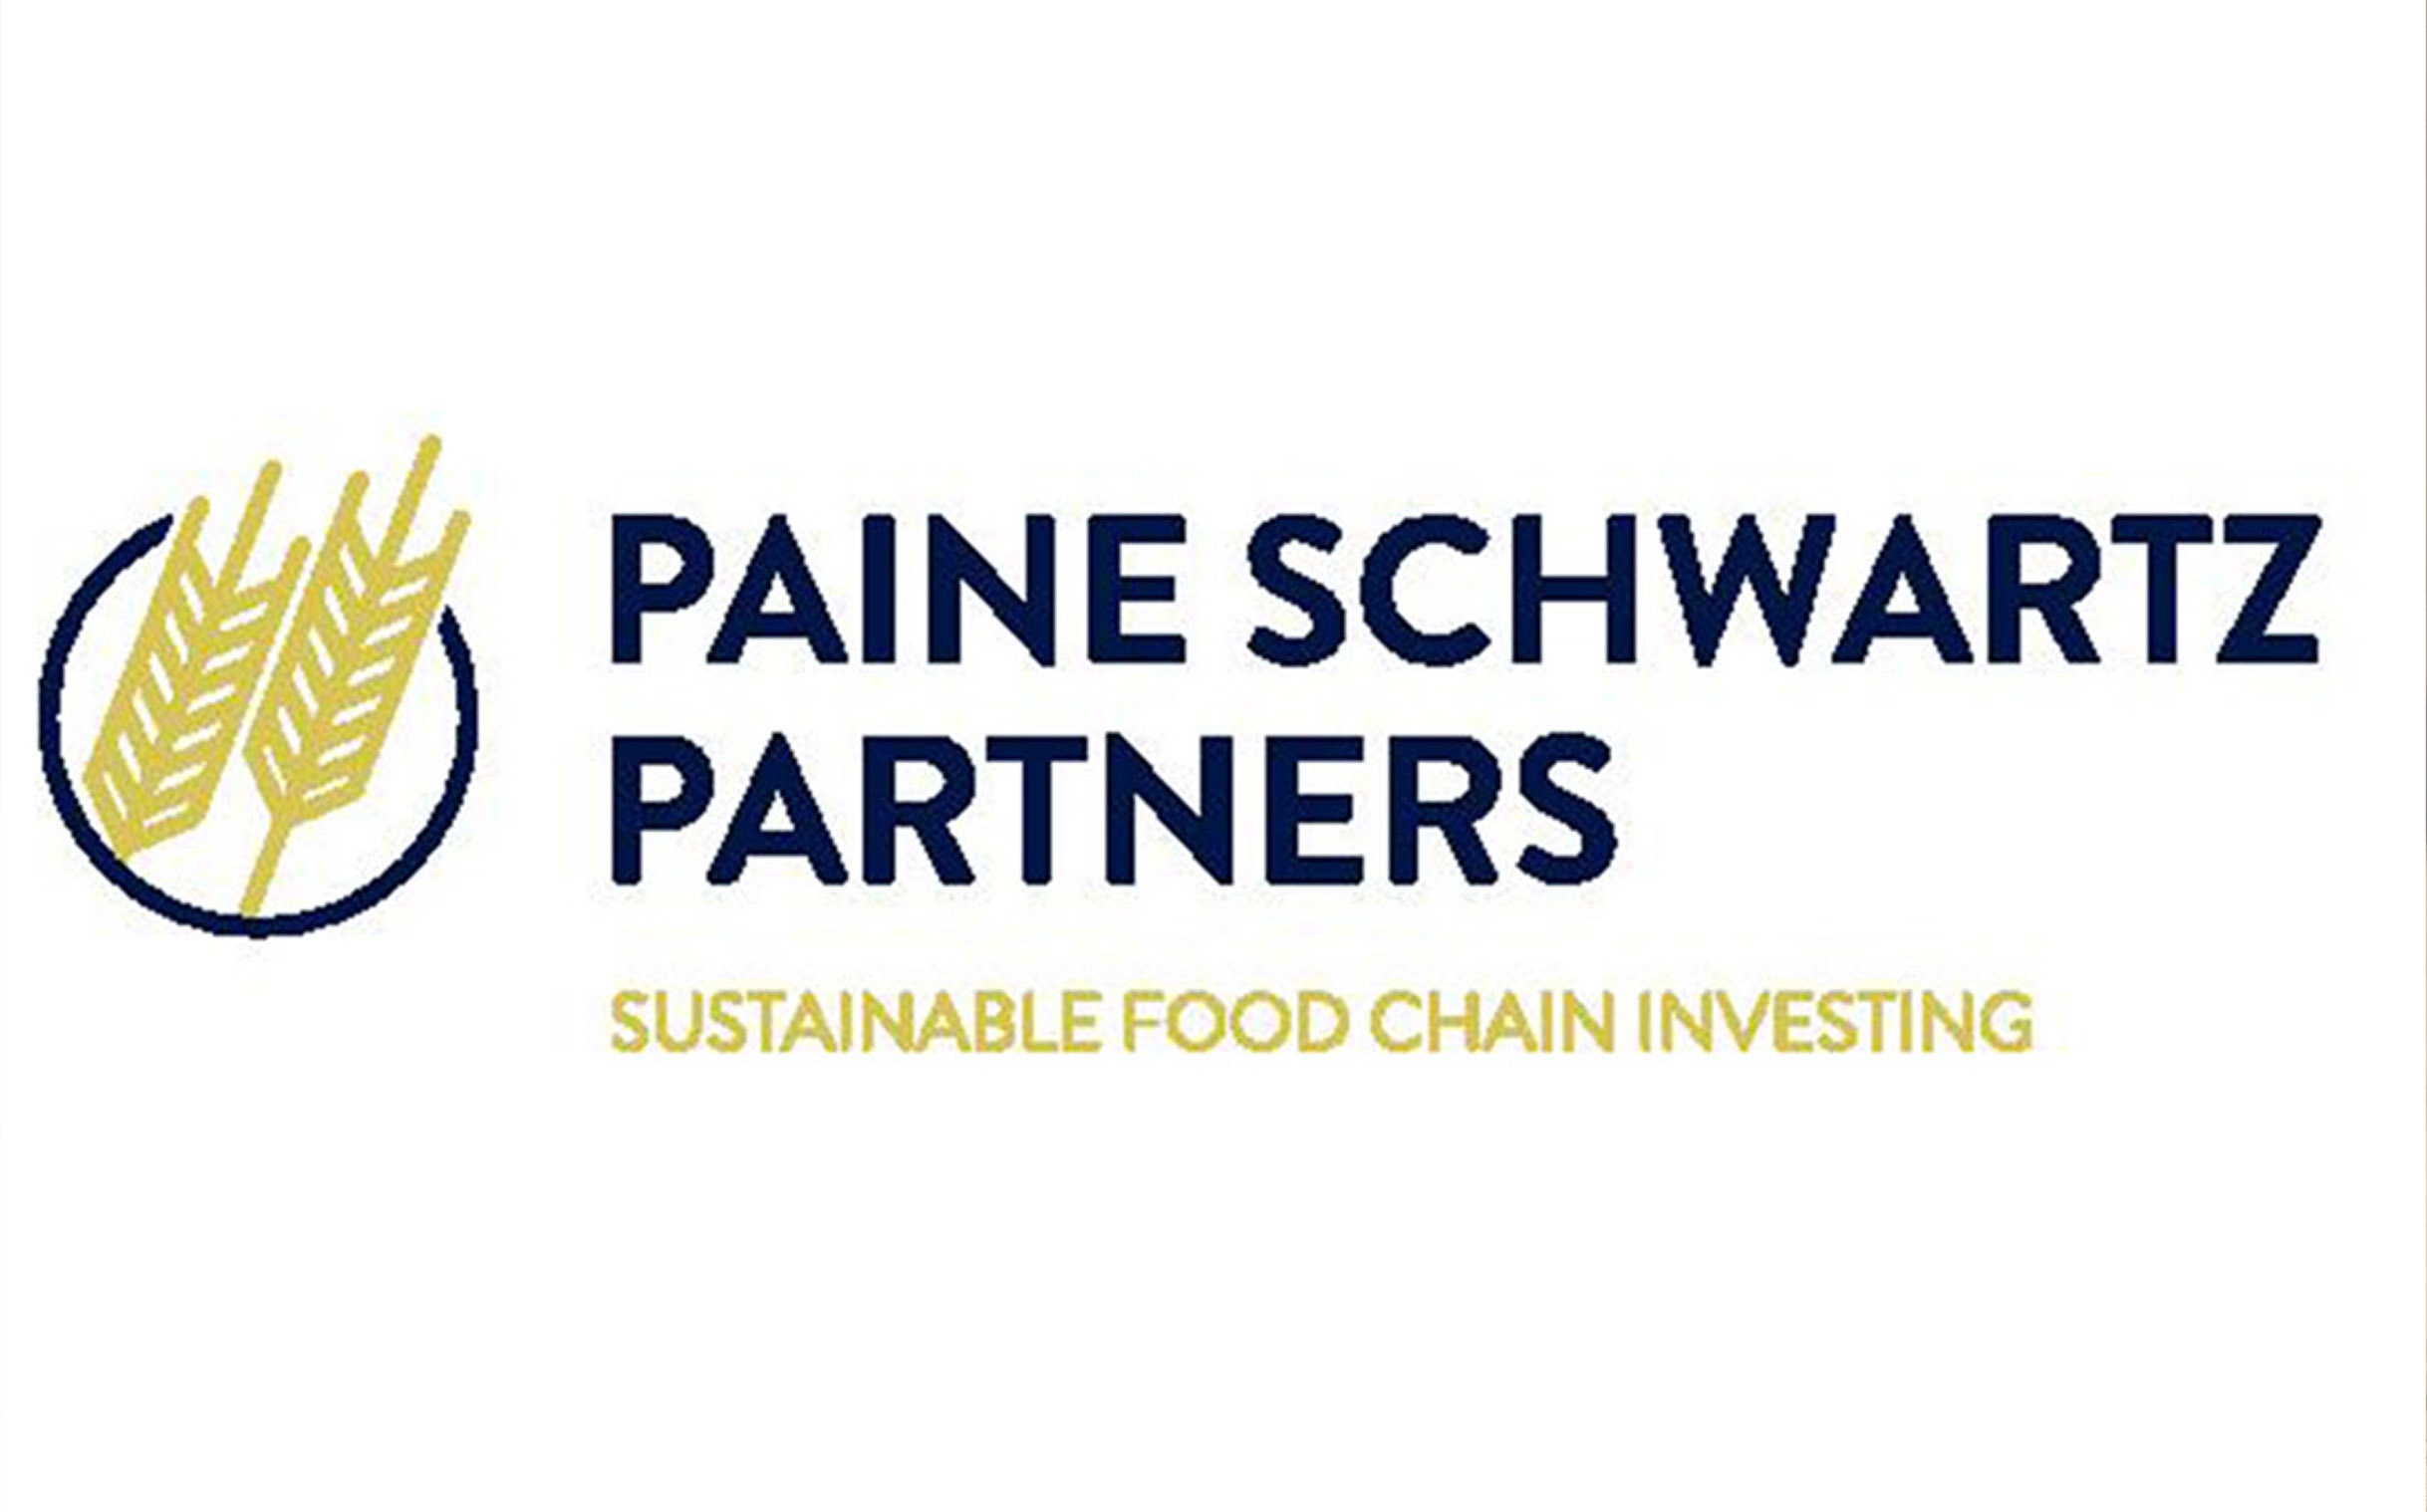 Paine Schwartz secures $1.4b in food and agribusiness fund